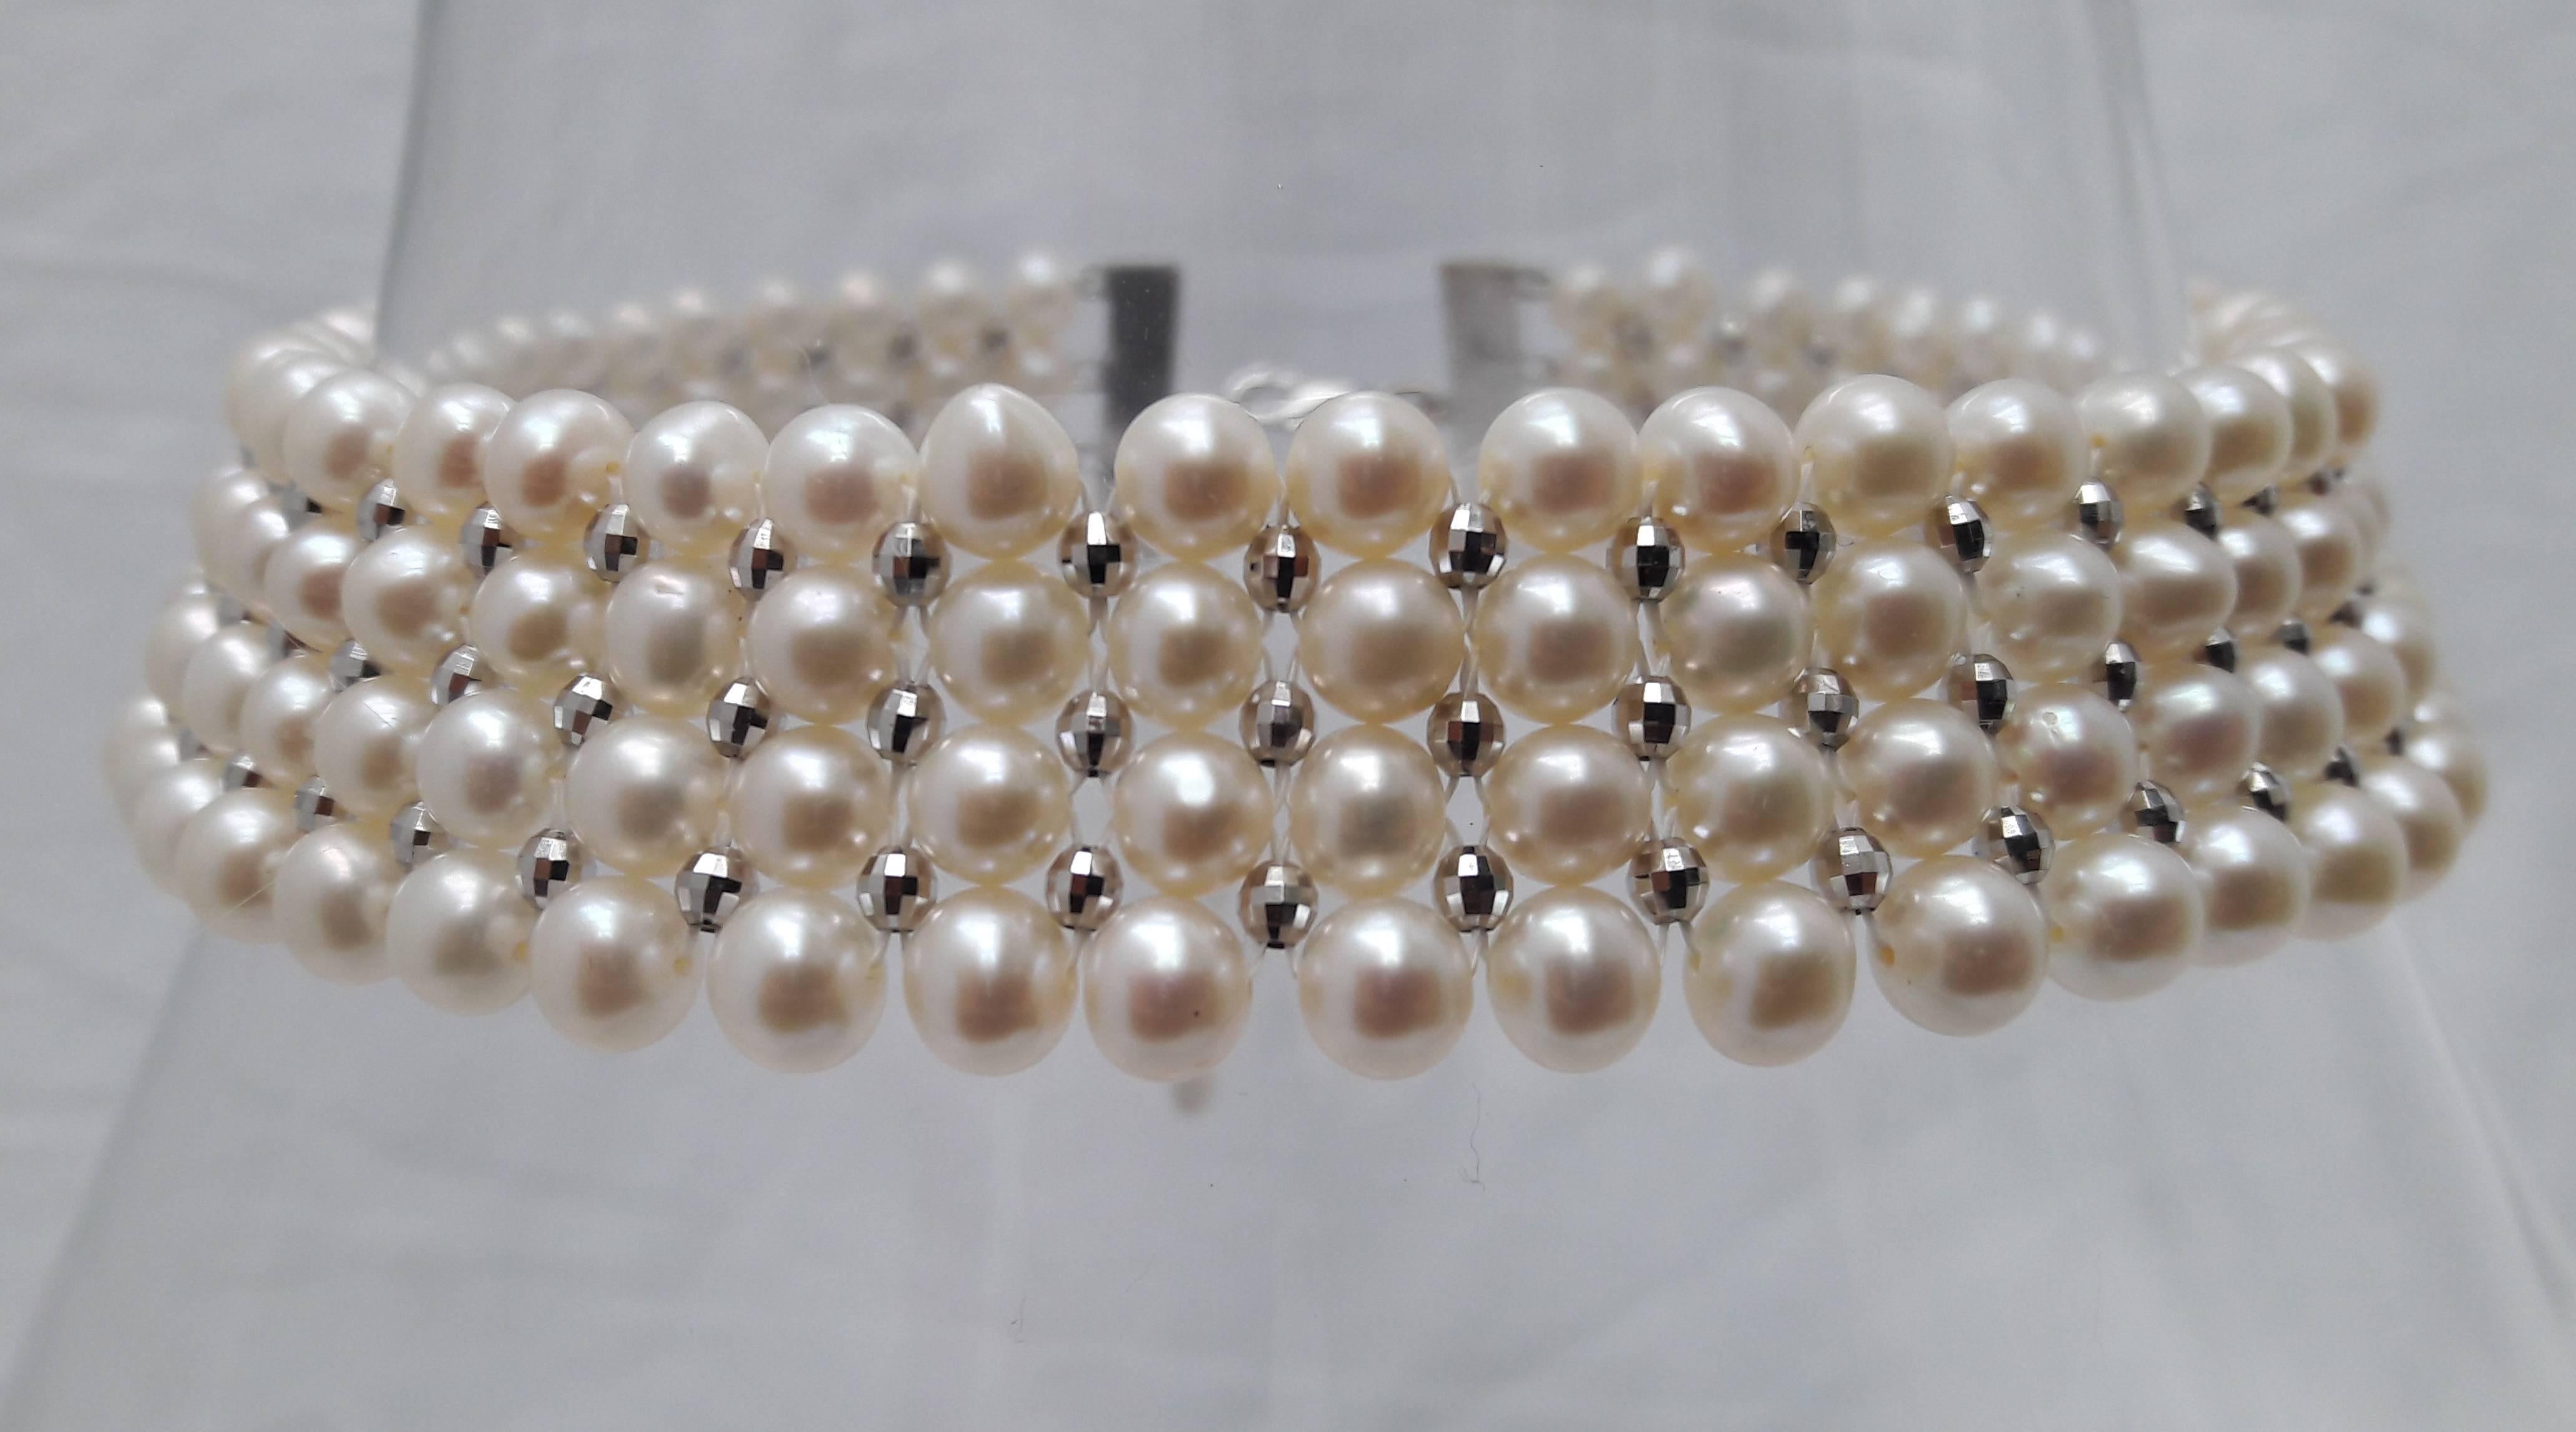 This intricately hand woven choker is made of  4 mm & 5 mm pearls with 14 k white gold-plated silver faceted beads. The use of graduated sized pearls allows for natural curvature in design to fit along the form of the neckline. 

Clasp is made